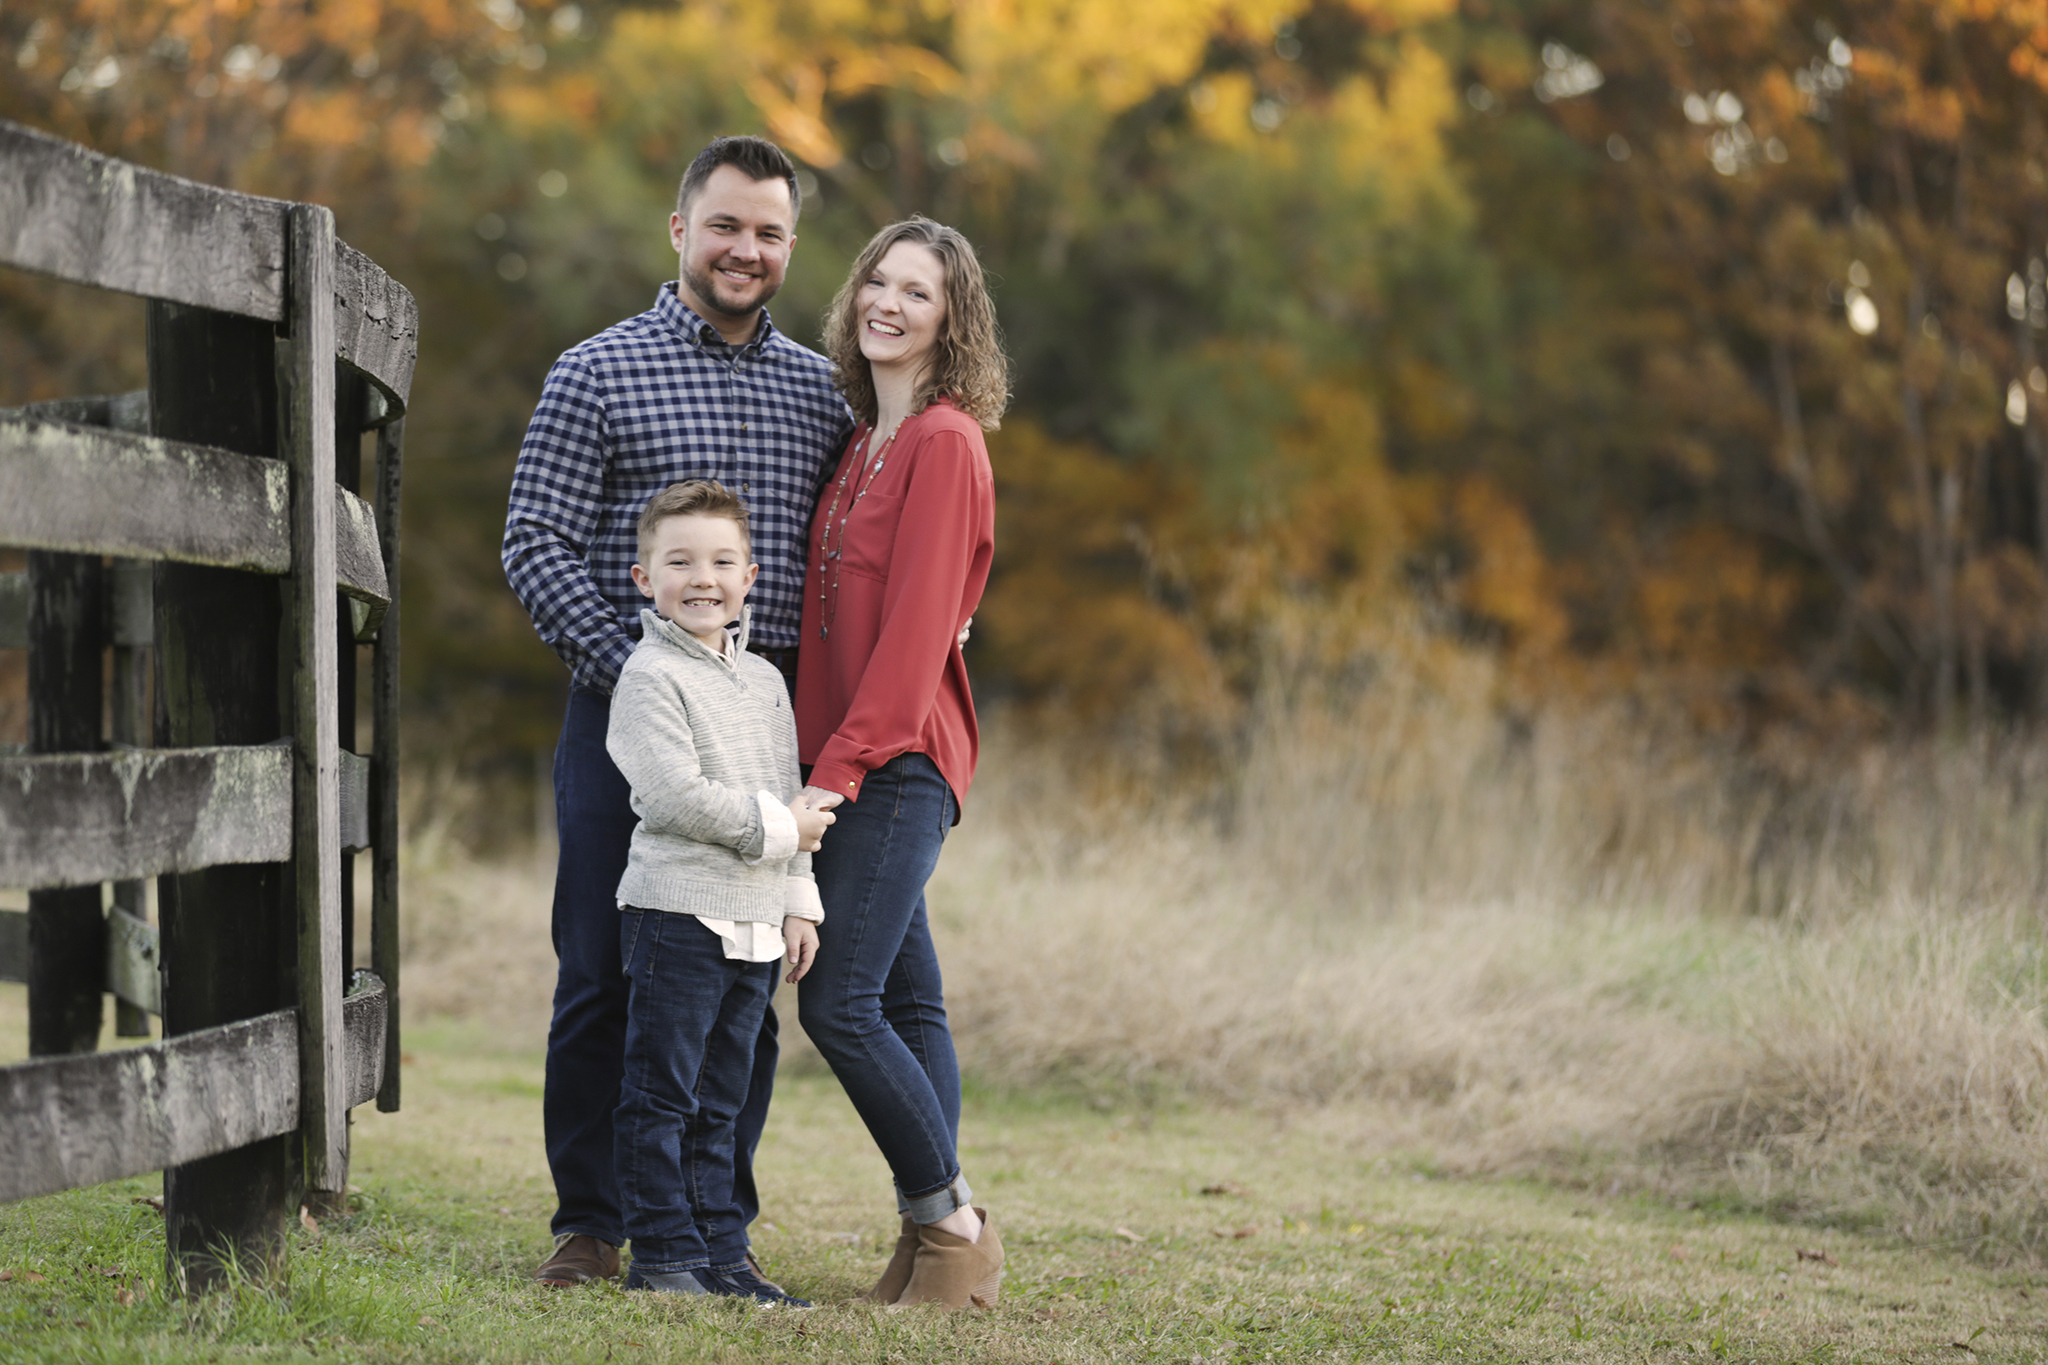 What To Wear To Your Family Photo Shoot - Edyta Grazman Photography